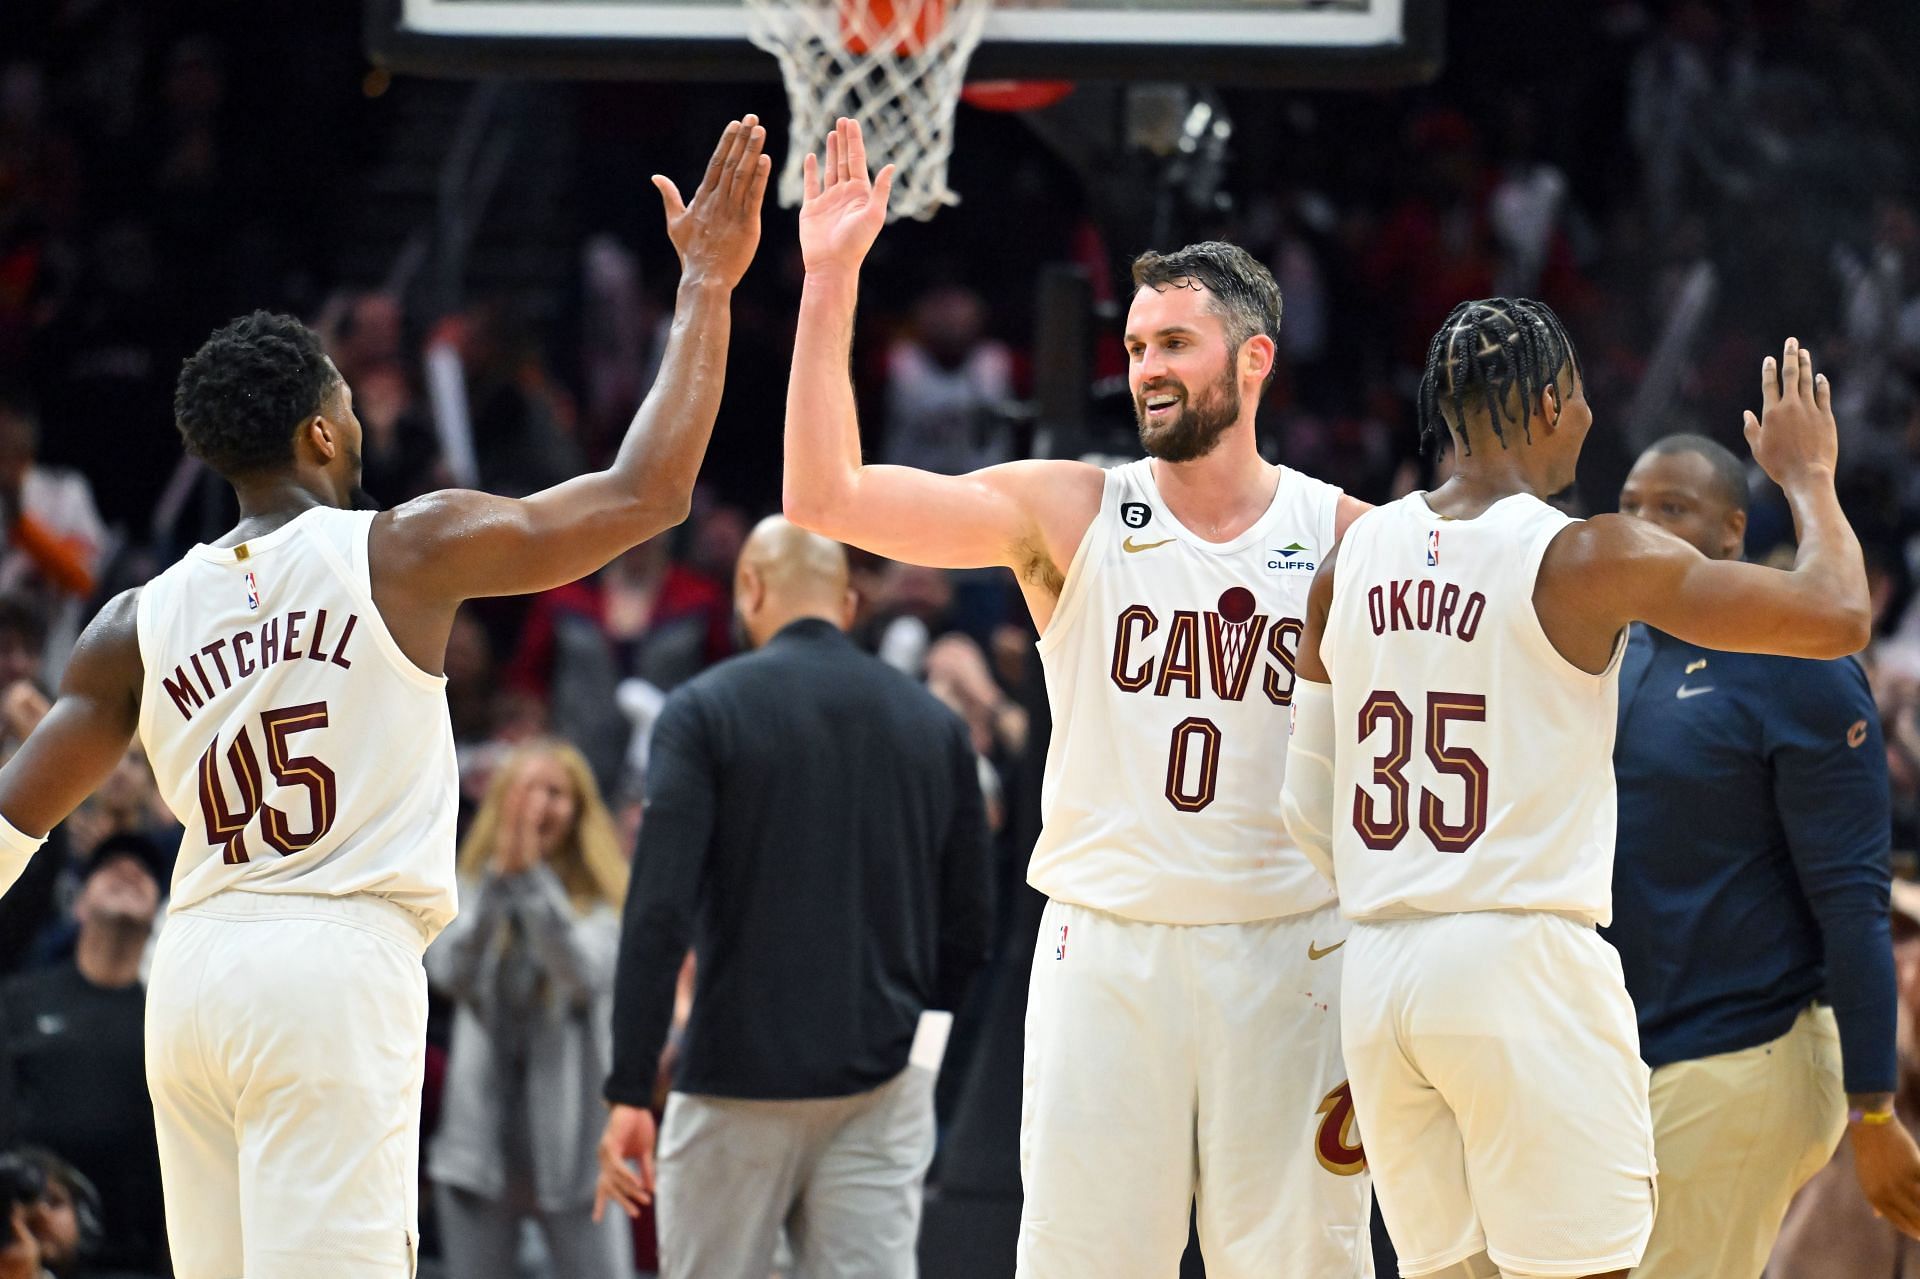 Donovan Mitchell, Kevin Love and Isaac Okoro of the Cleveland Cavaliers.